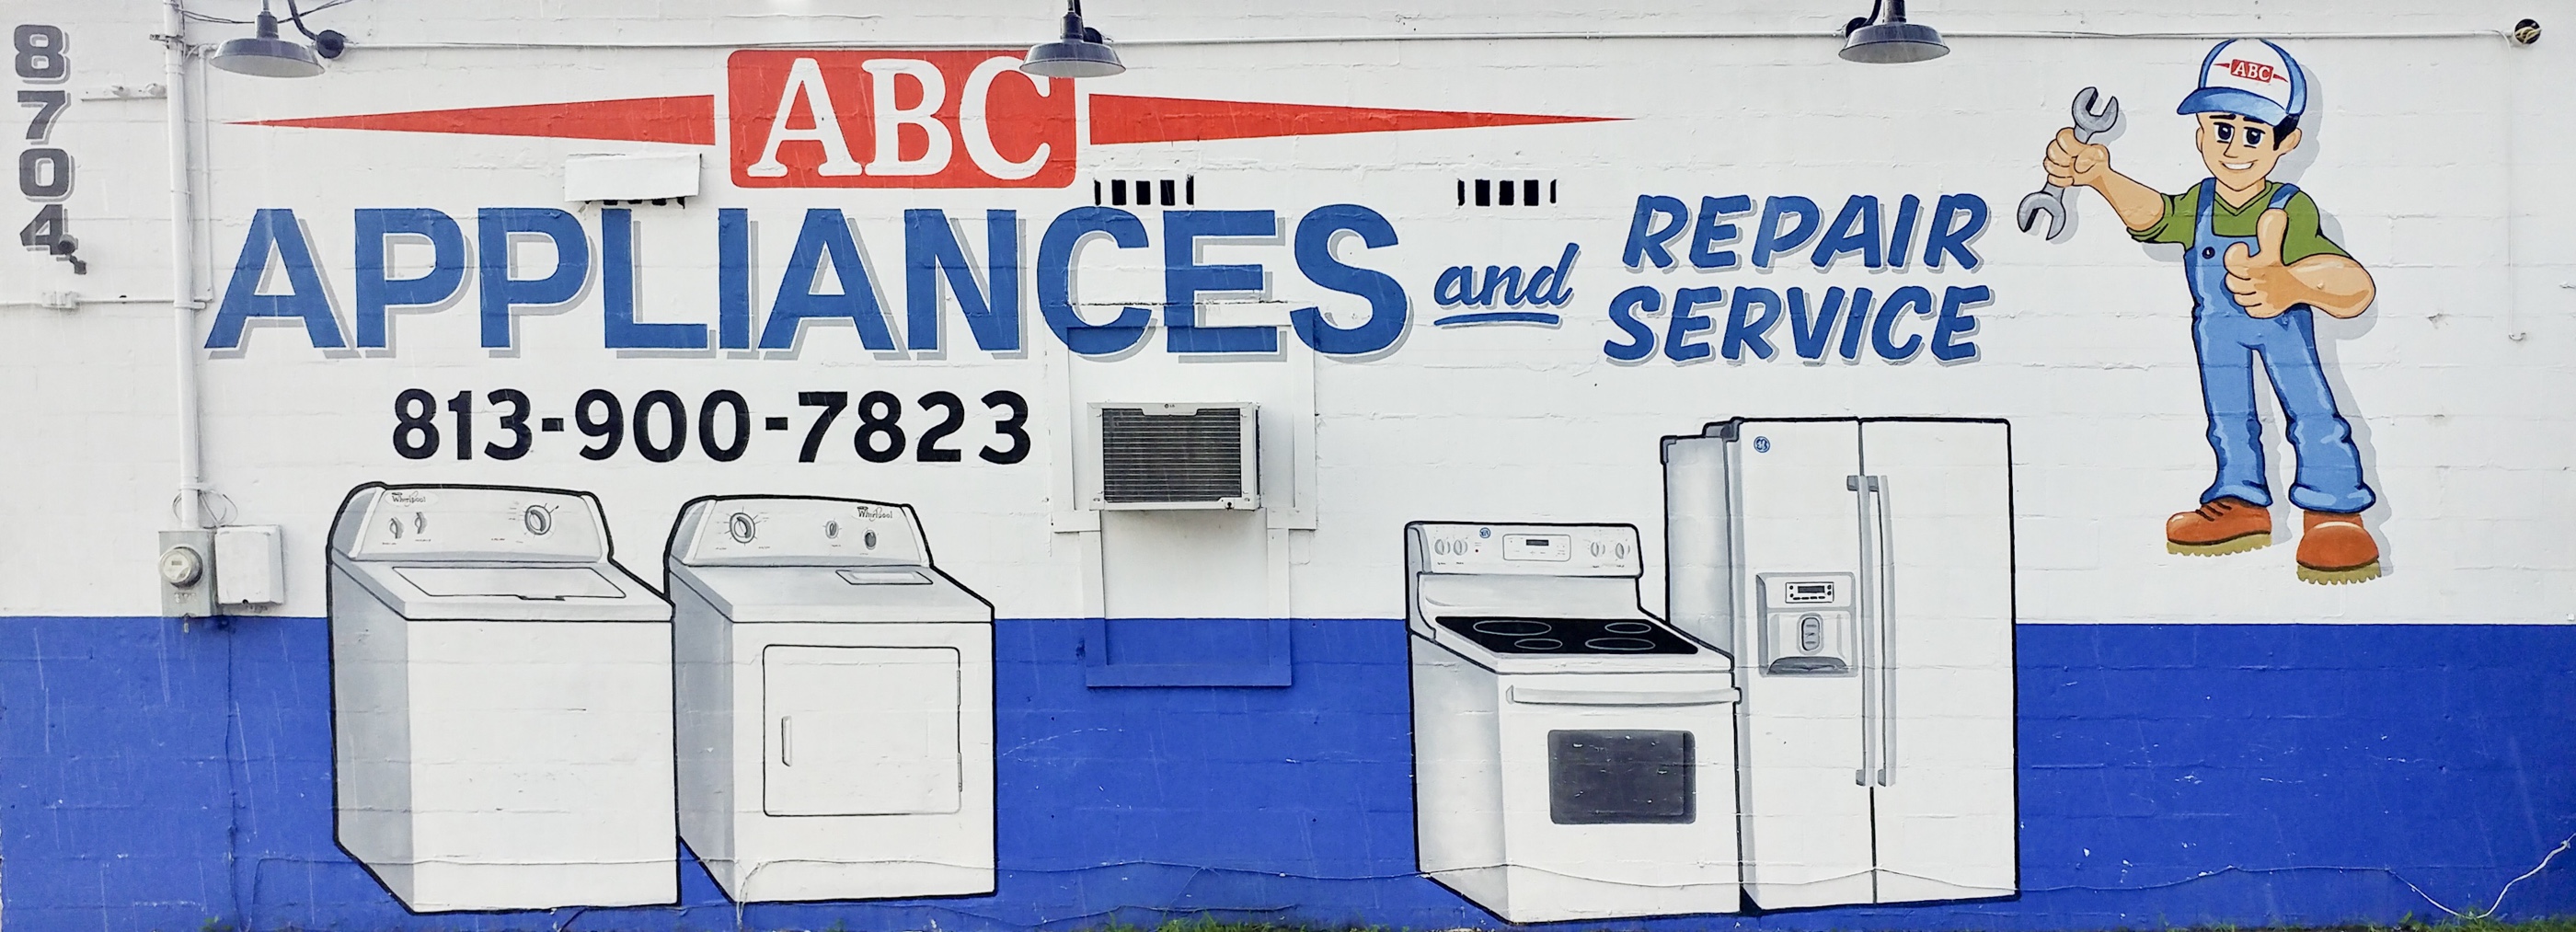 ABC Appliances and Repair Service on N. Nebraska Ave. in Tampa, FL. Appliance Repair Services